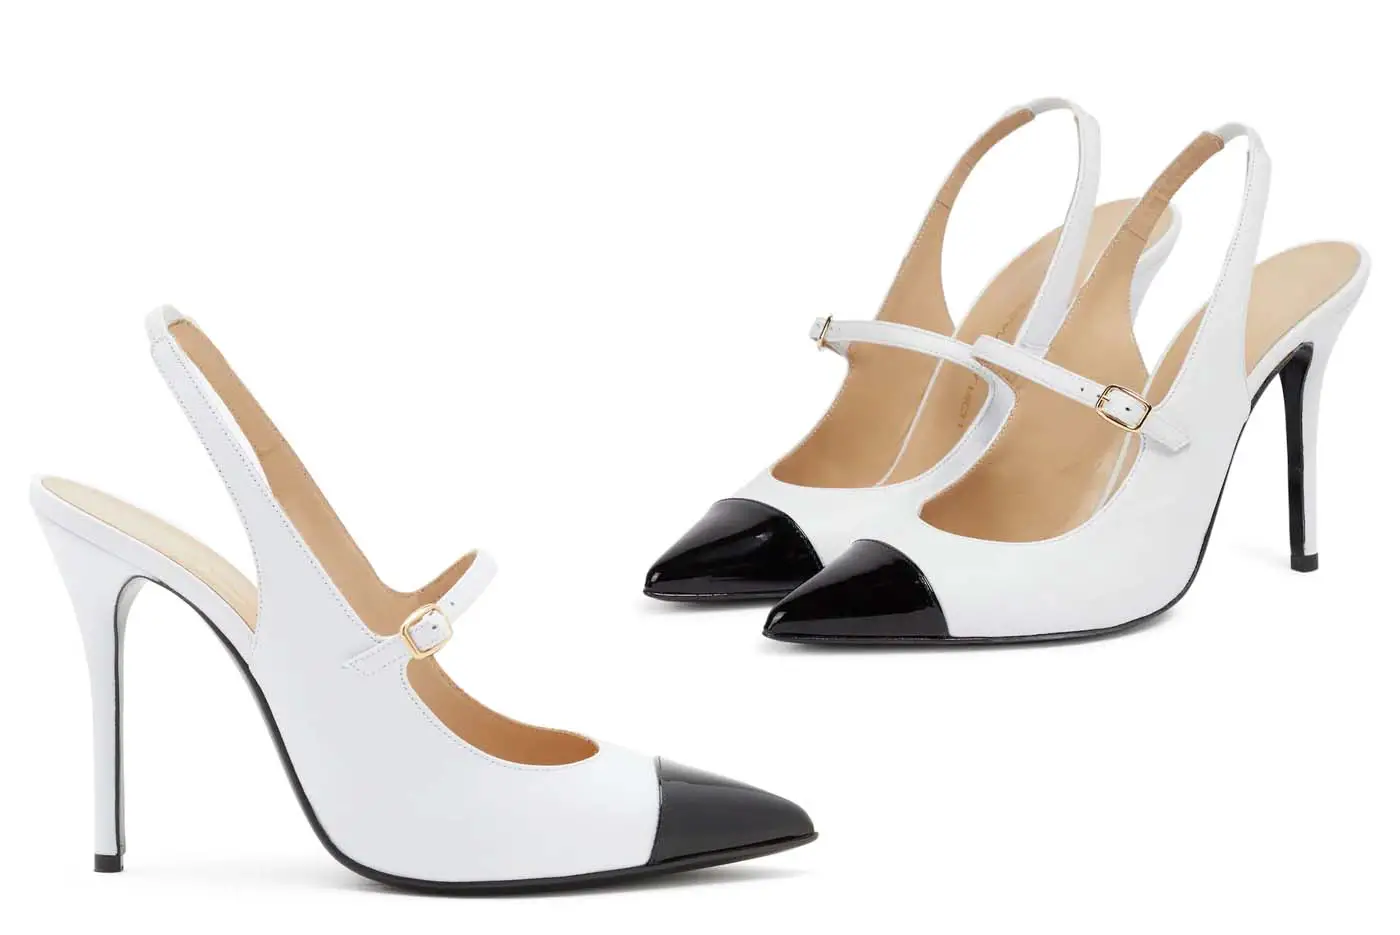 The Princess of Wales wore Alessandra Rich Fab Two Tone Pumps in White